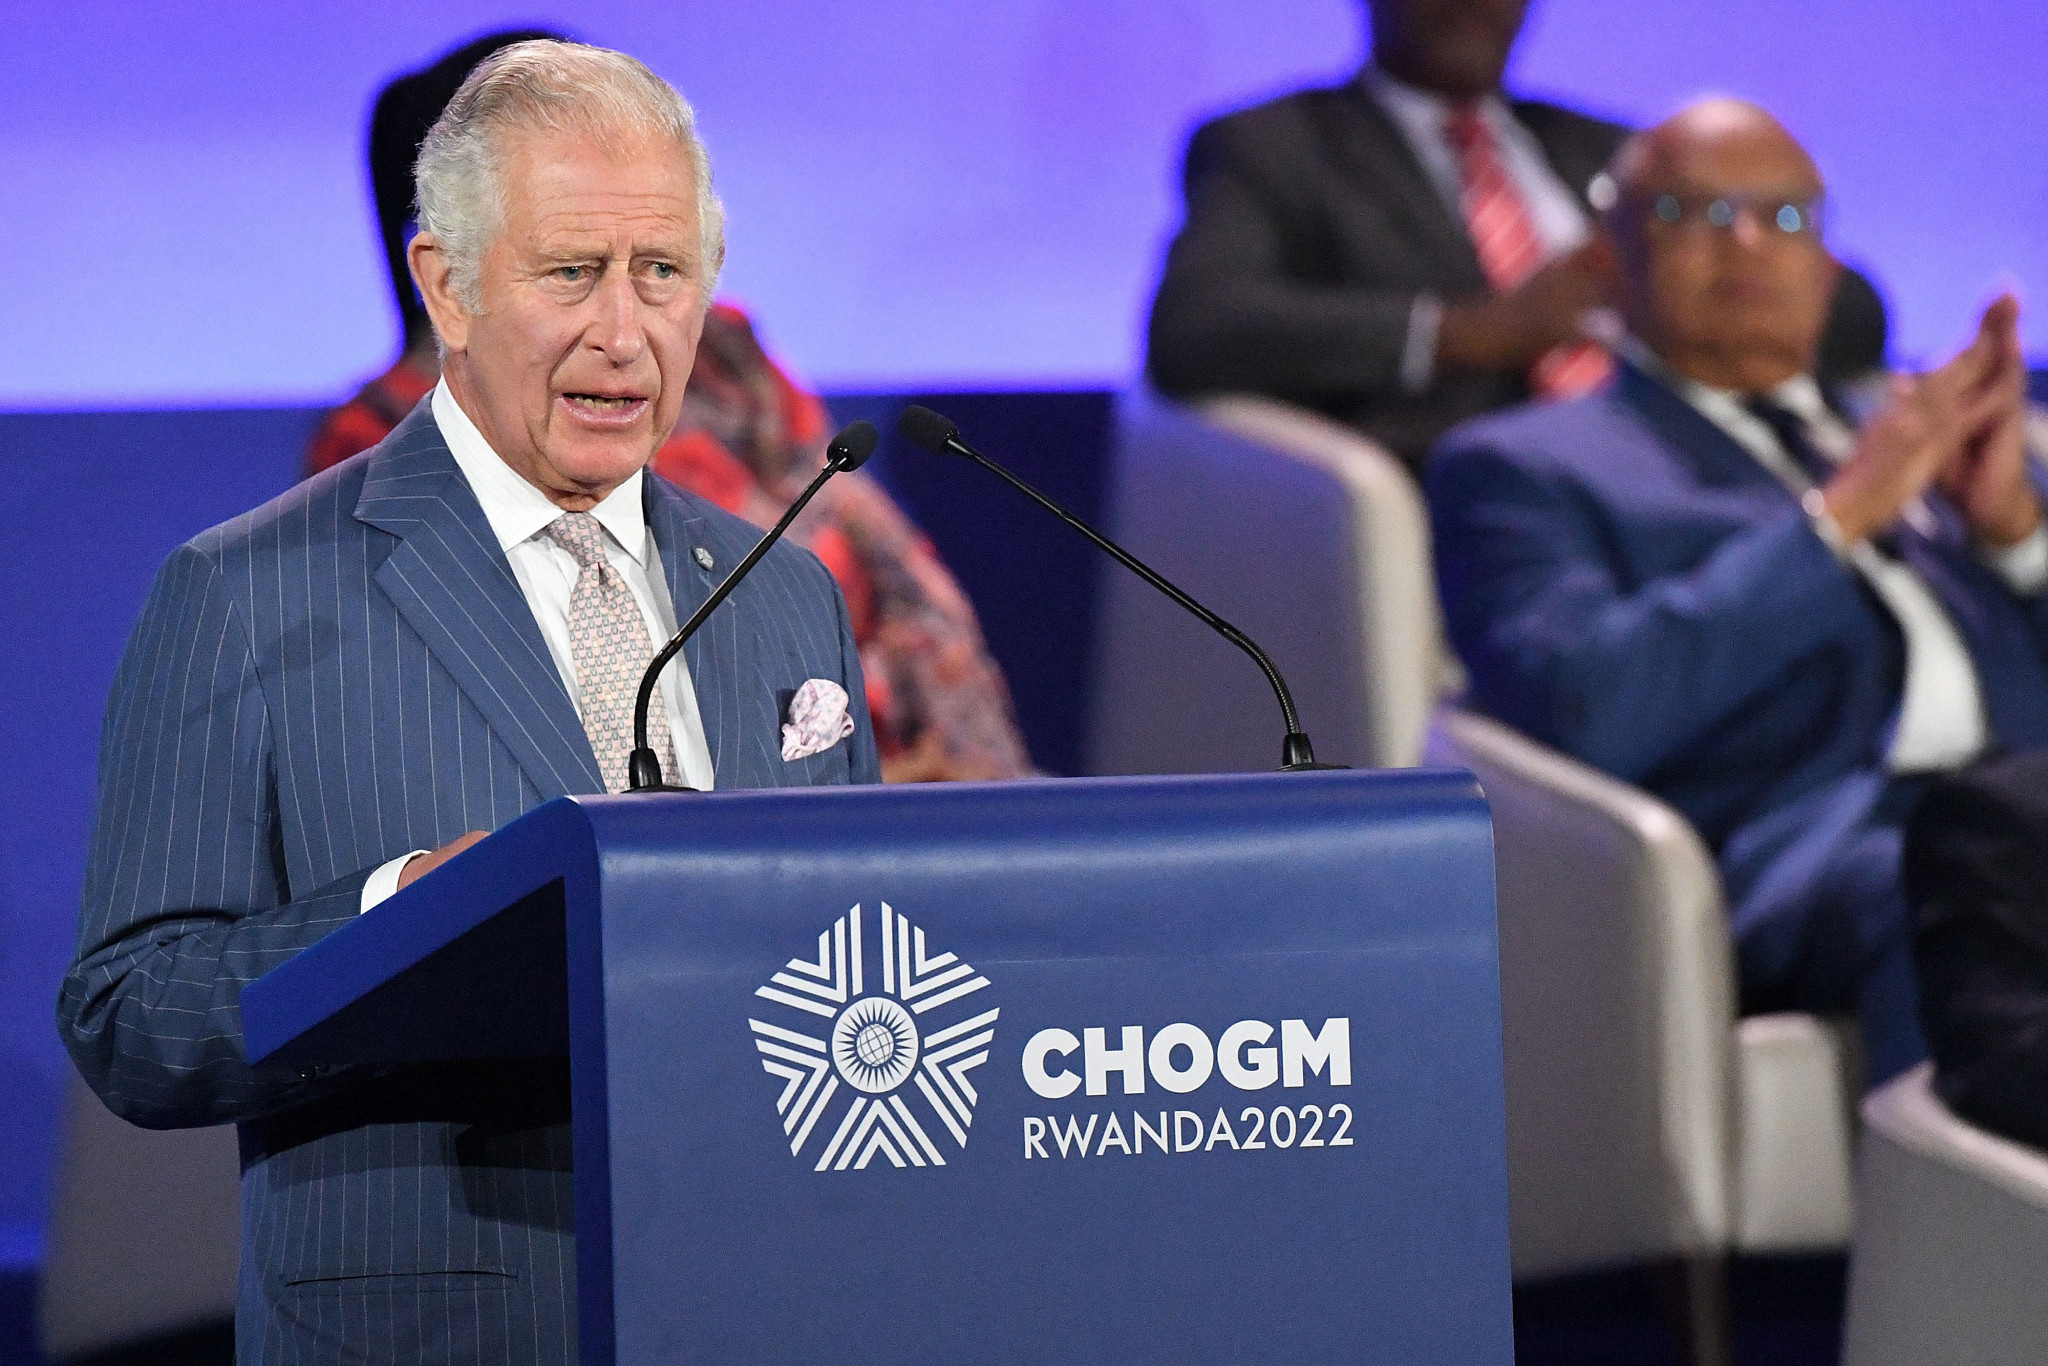 Prince Charles expressed his excitement for Birmingham 2022 at the Commonwealth Heads of Government Meeting in Rwanda ©Getty Images